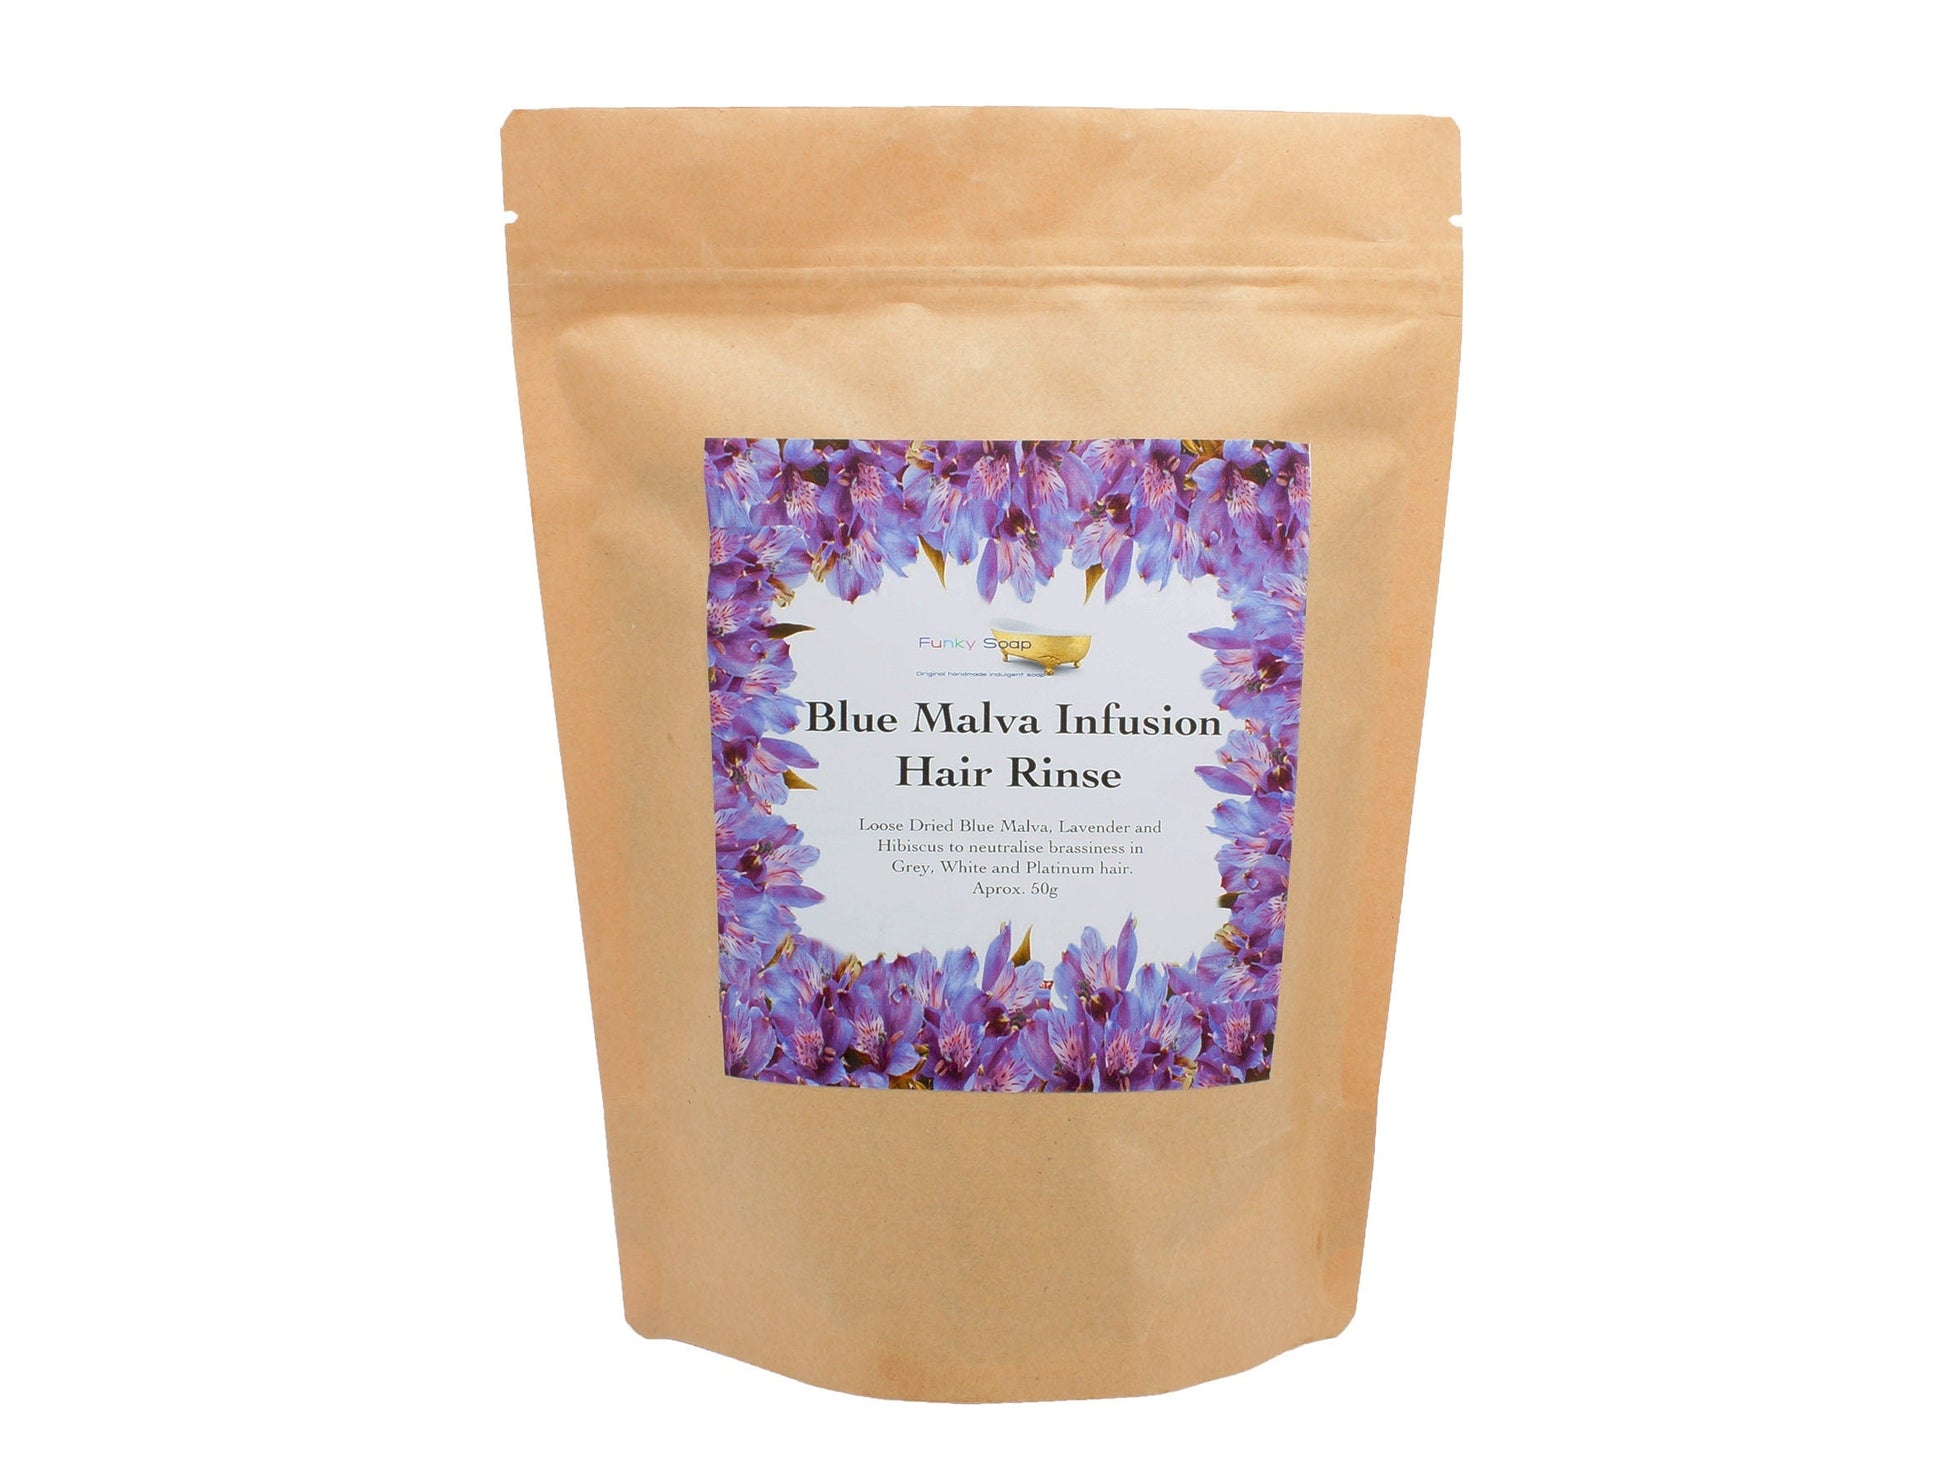 Blue Malva Infusion Hair Rinse for Grey, White and Platinum Hair, Loose Dried Flowers 50g - Funky Soap Shop